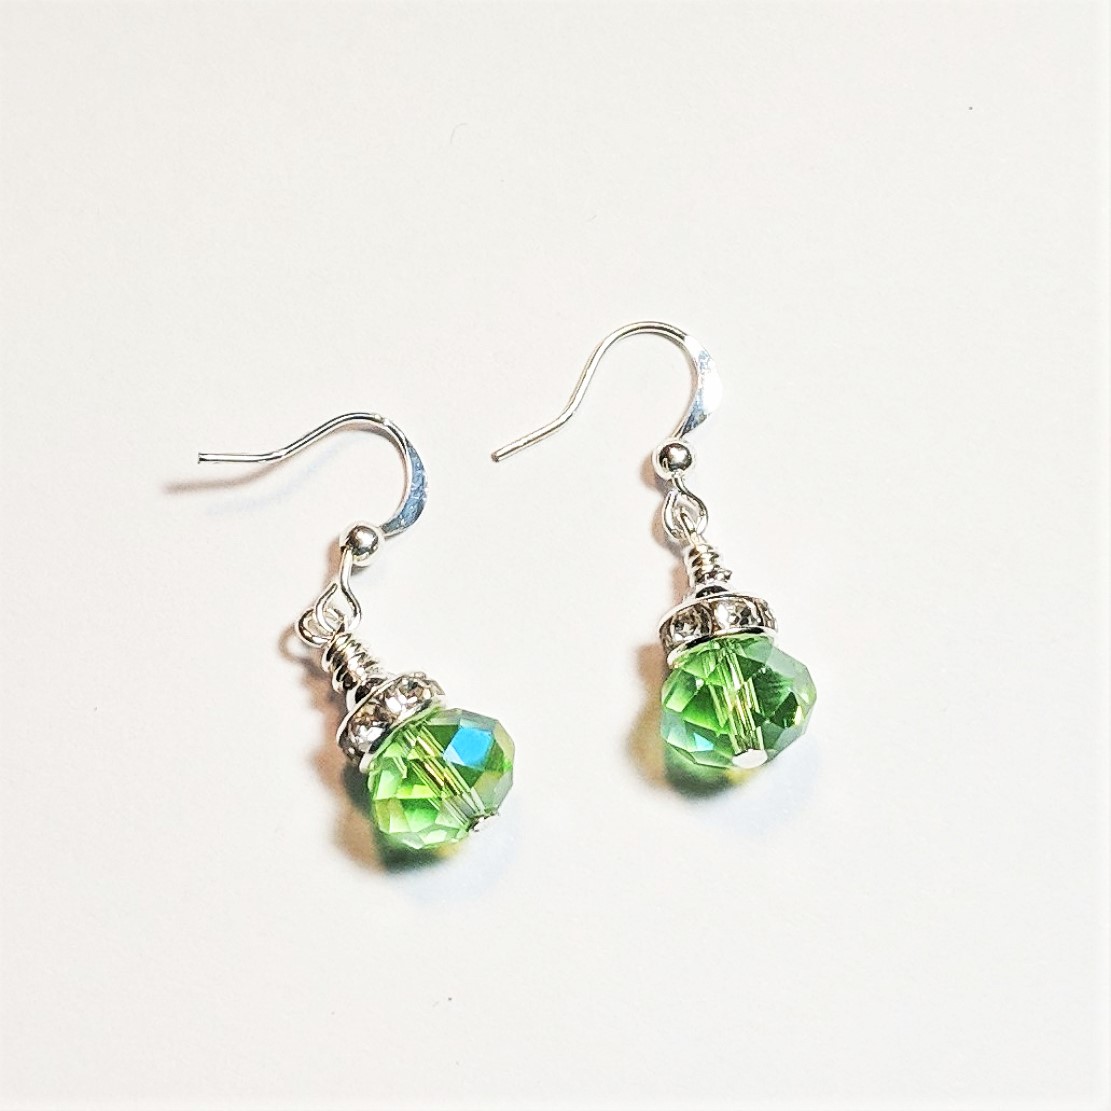 Green Crystal Cut Ornament Earrings with Crystal Accents